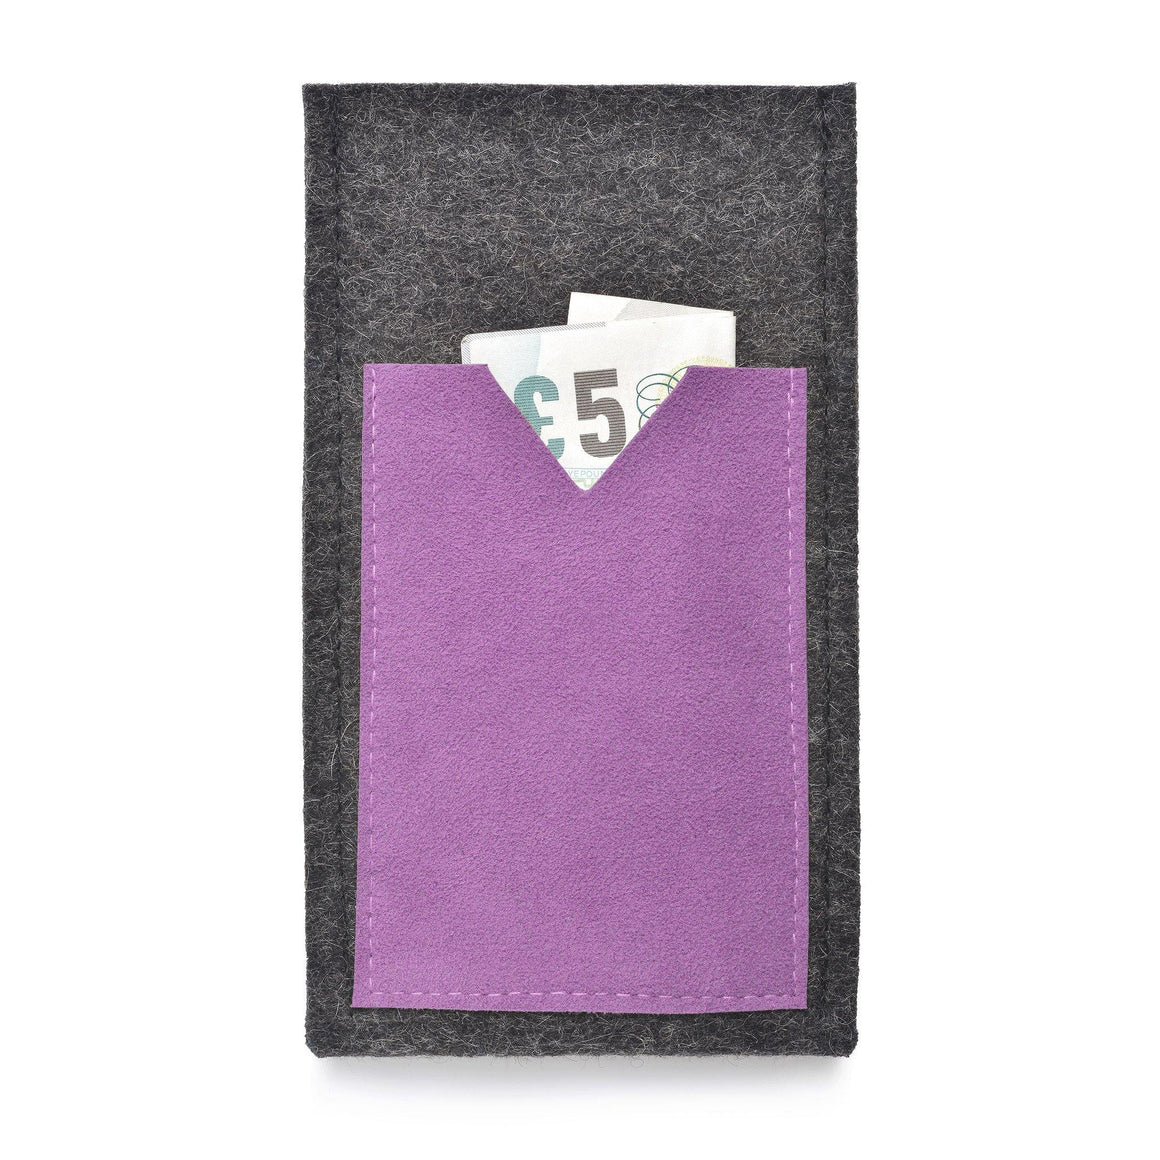 iPhone Wool Felt Cover Charcoal/Lilac - Wrappers UK